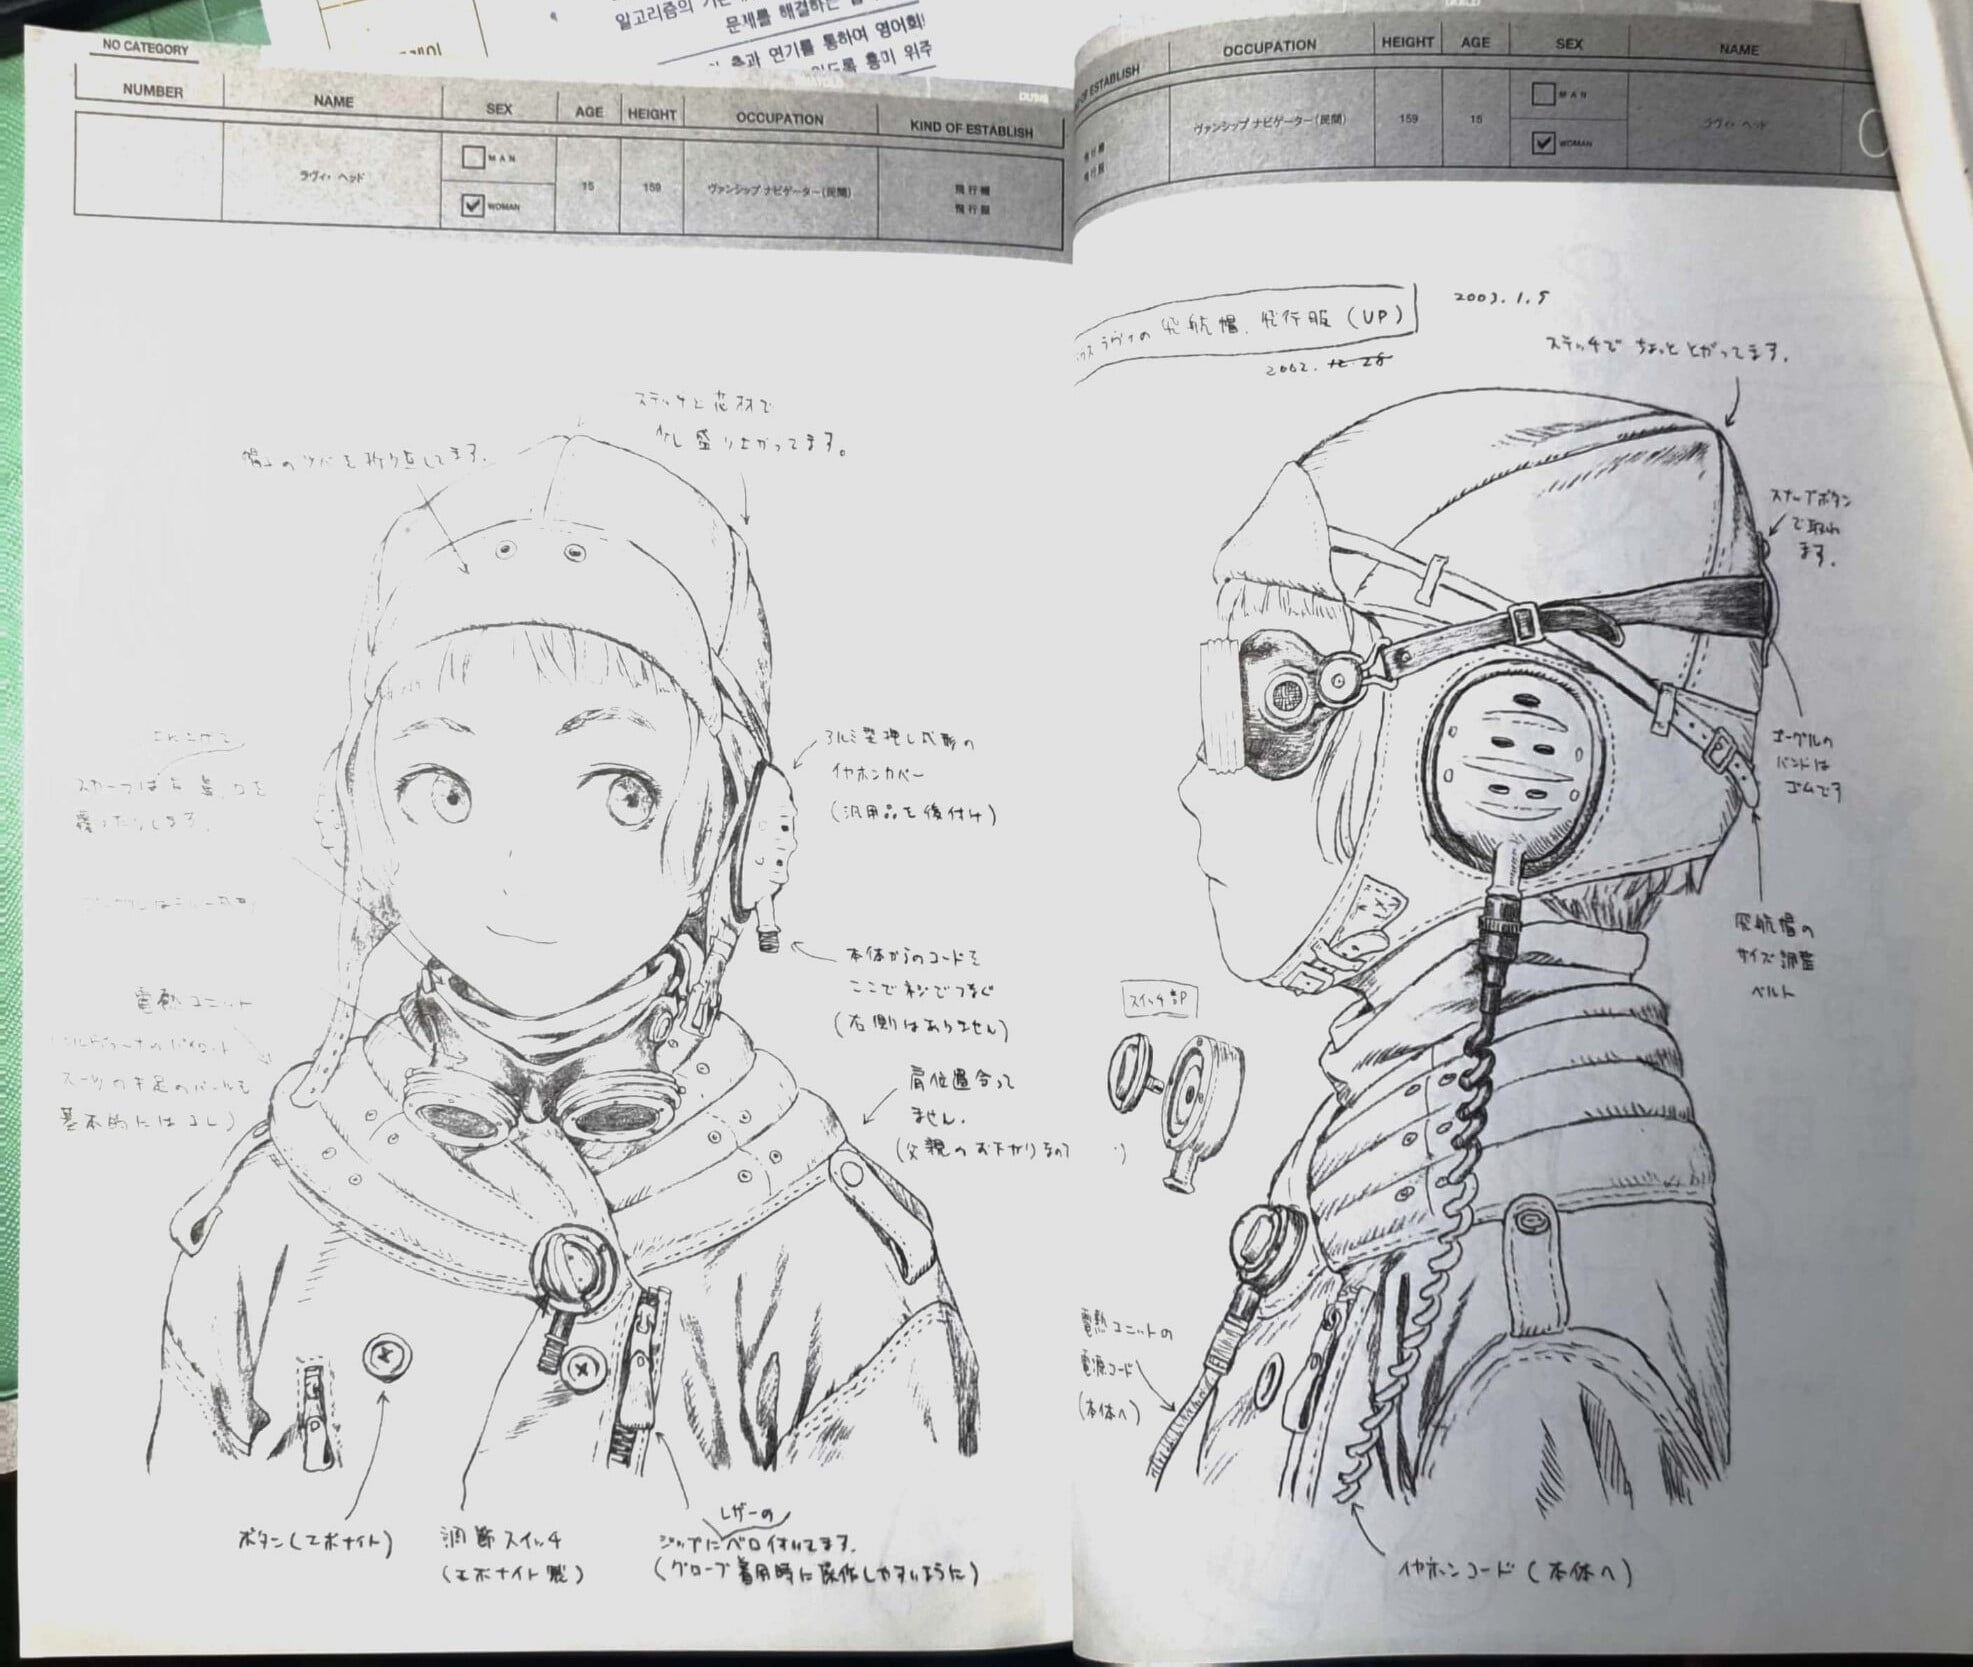 SPHERES - LASTEXILE 1st Character Filegraphy